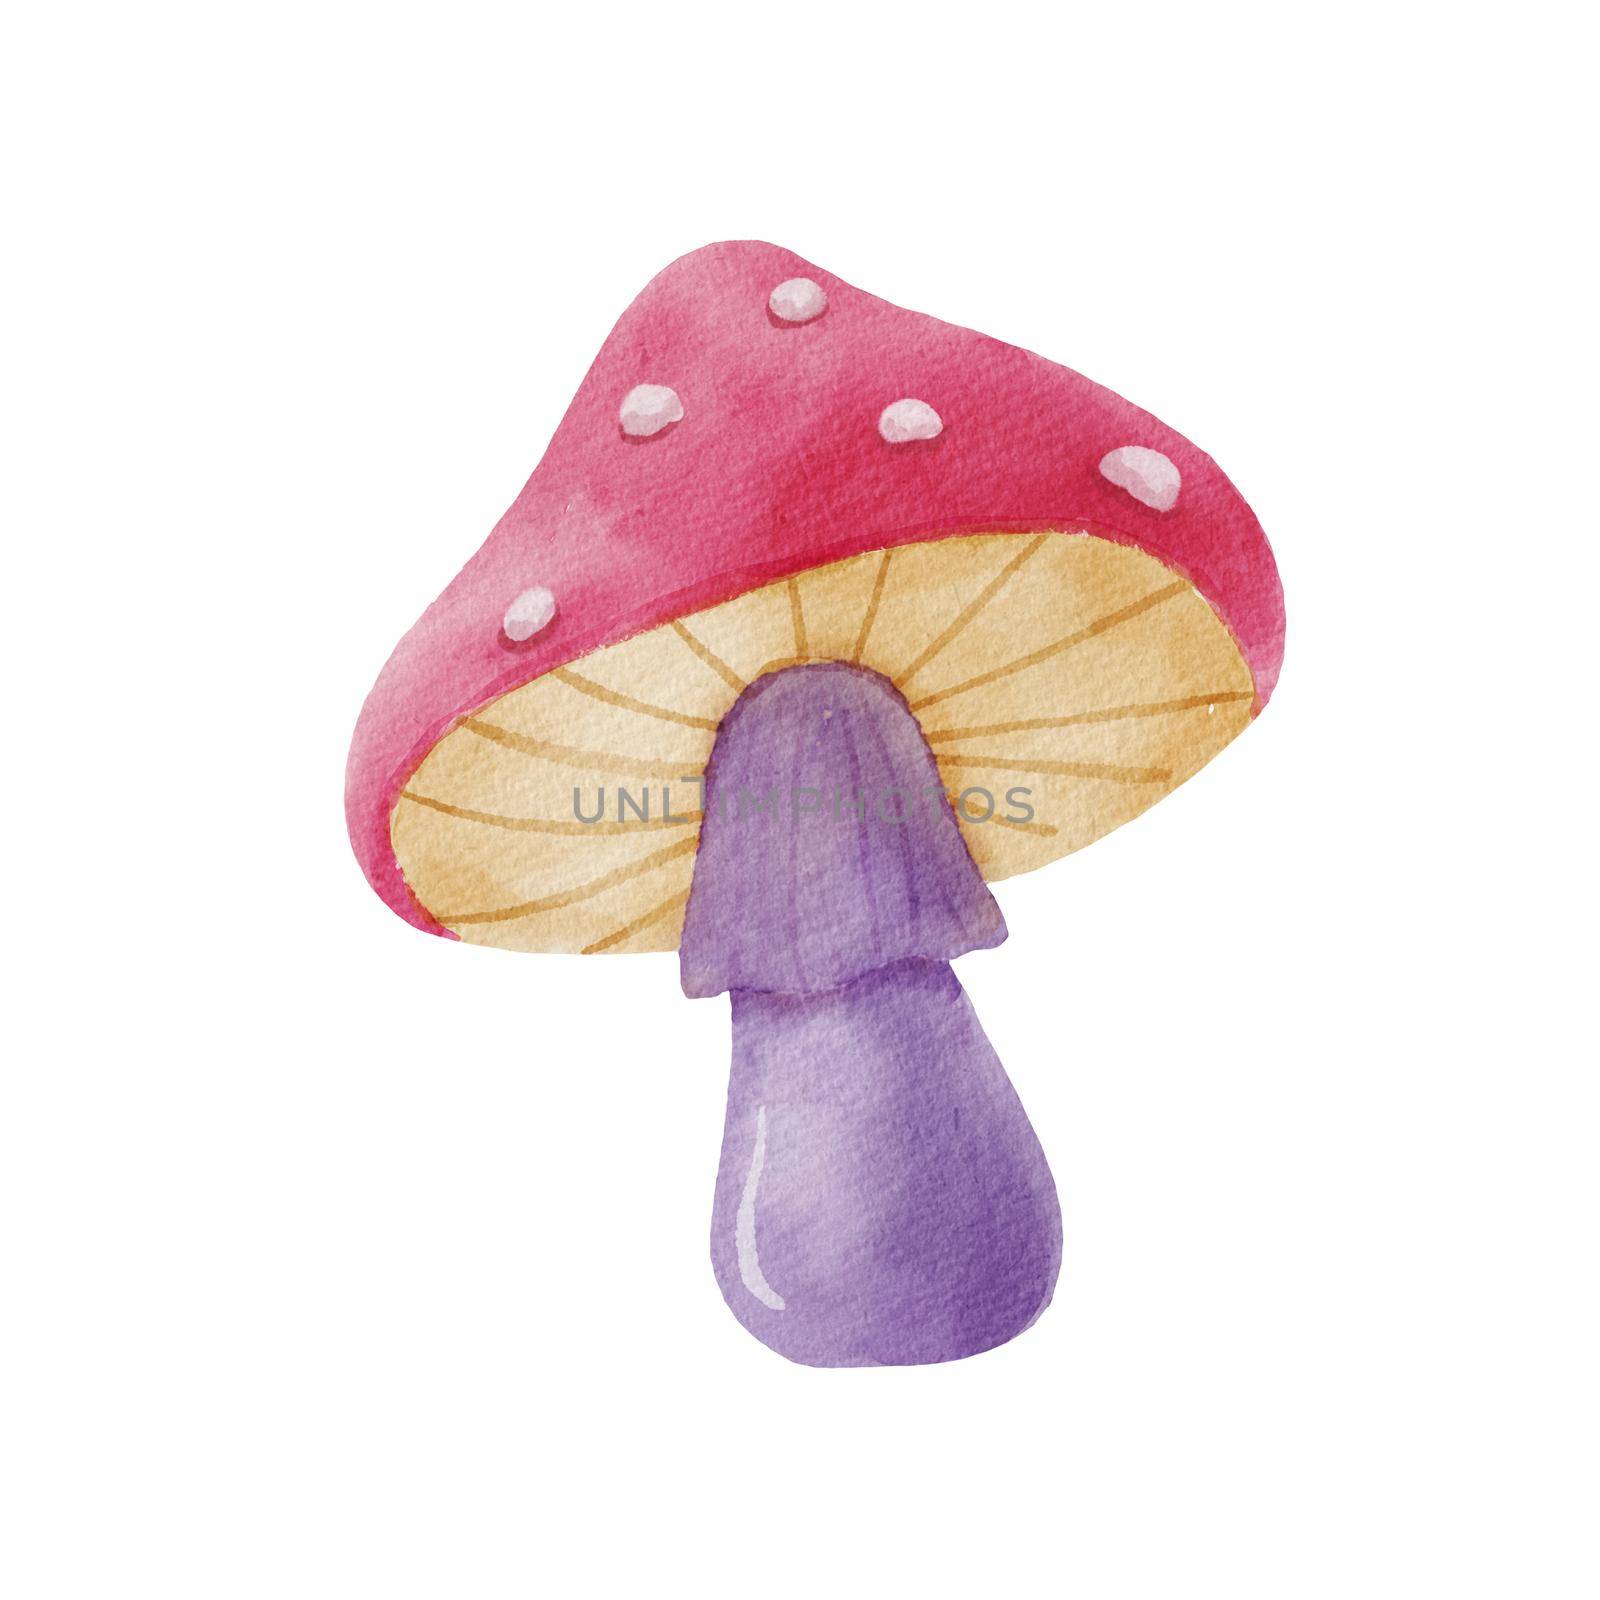 Watercolor illustration with magic Fly agaric mushroom. Hand drawn poison fungi. Forest cute mushroom isolated on white by ElenaPlatova